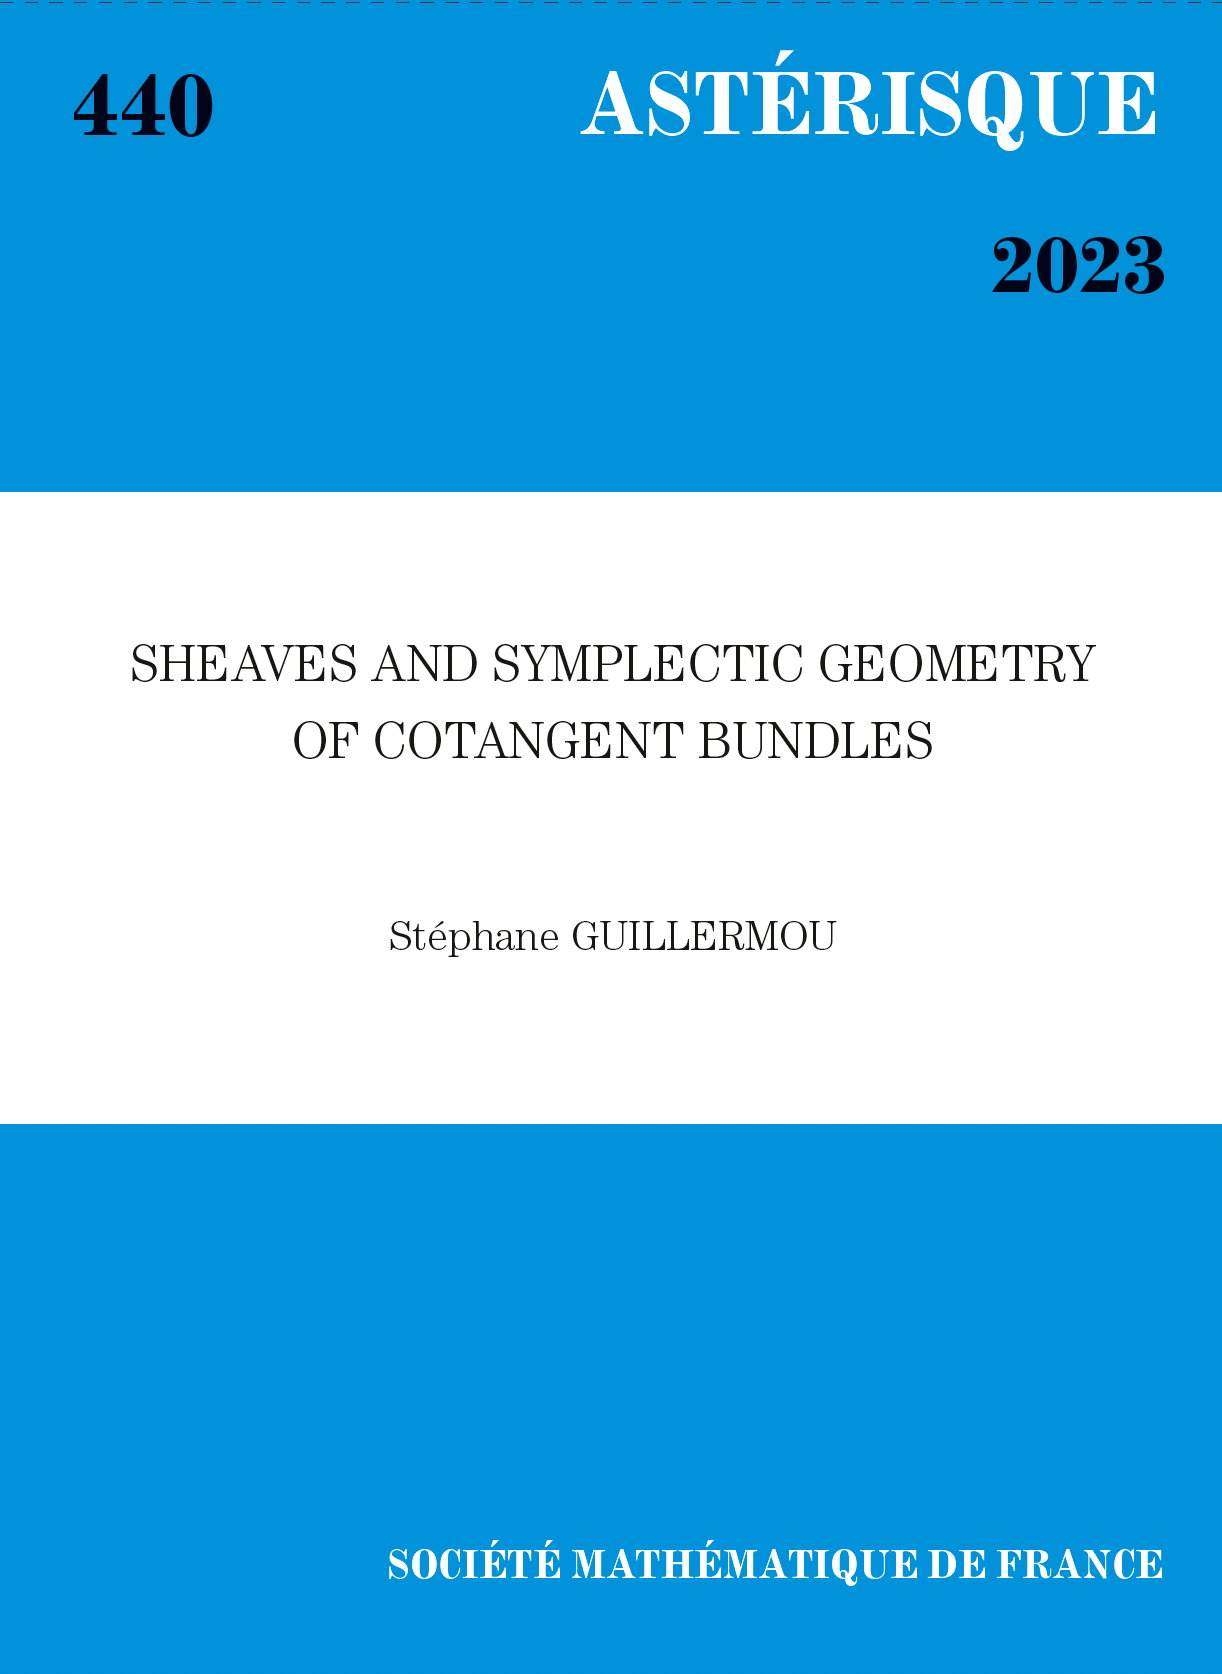 Sheaves and symplectic geometry of cotangent bundles